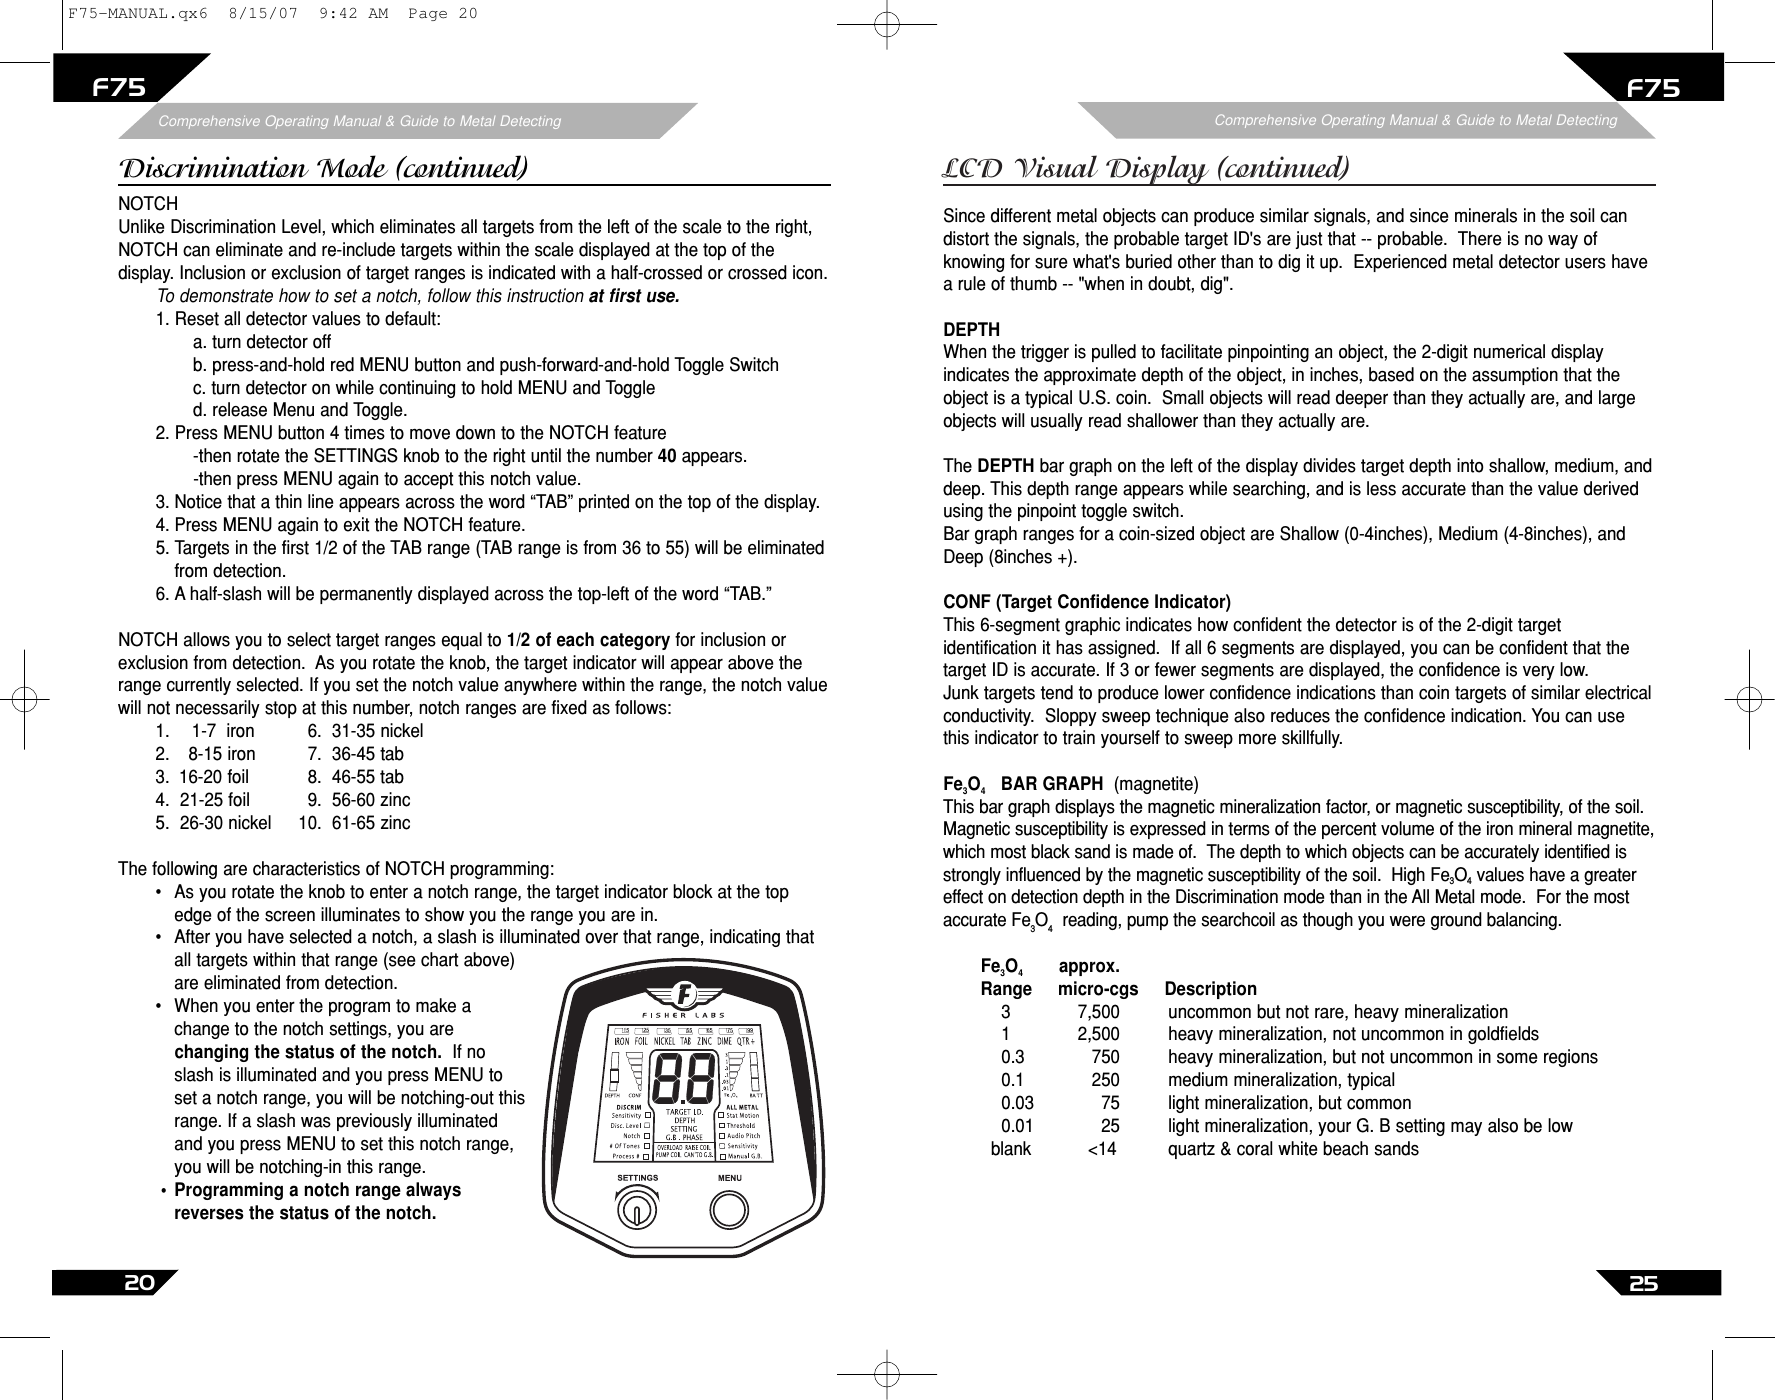 Page 20 of First Texas F75MD Hobby Metal Detector User Manual Layout 1